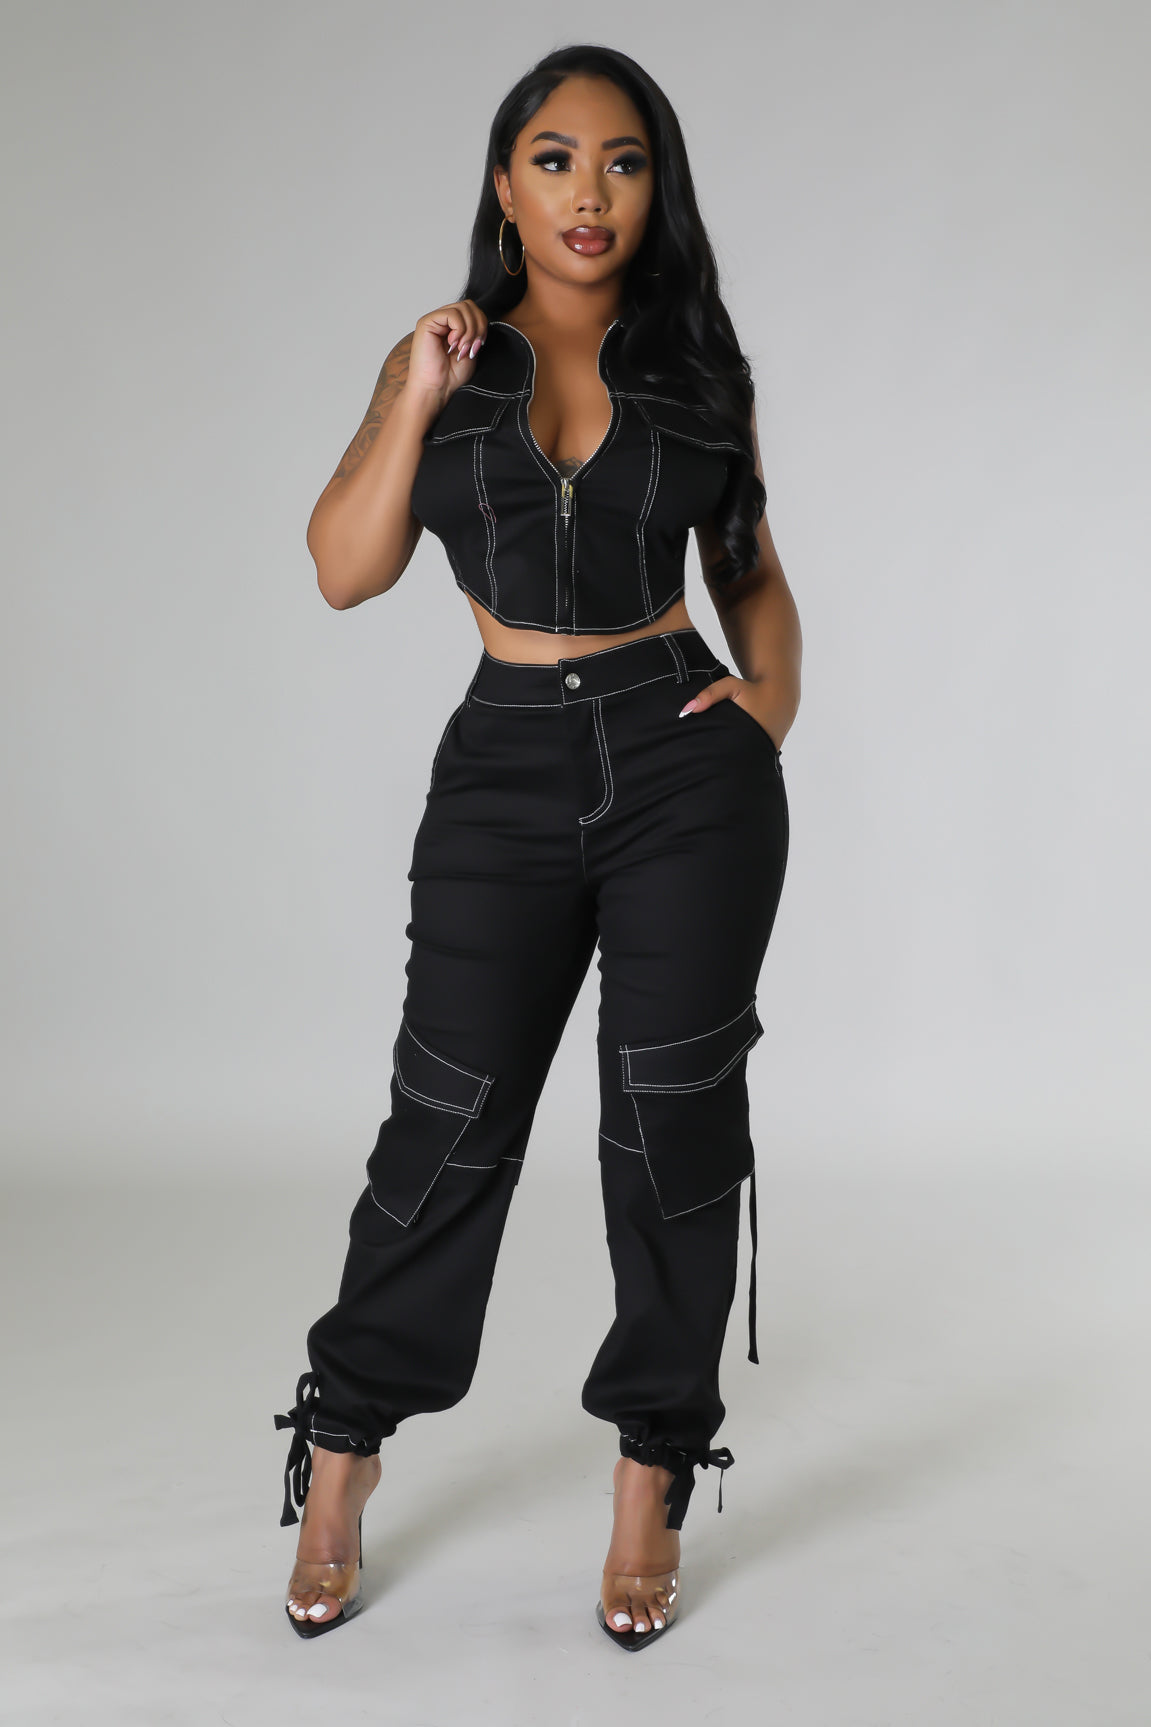 Ginnelle Pant Set